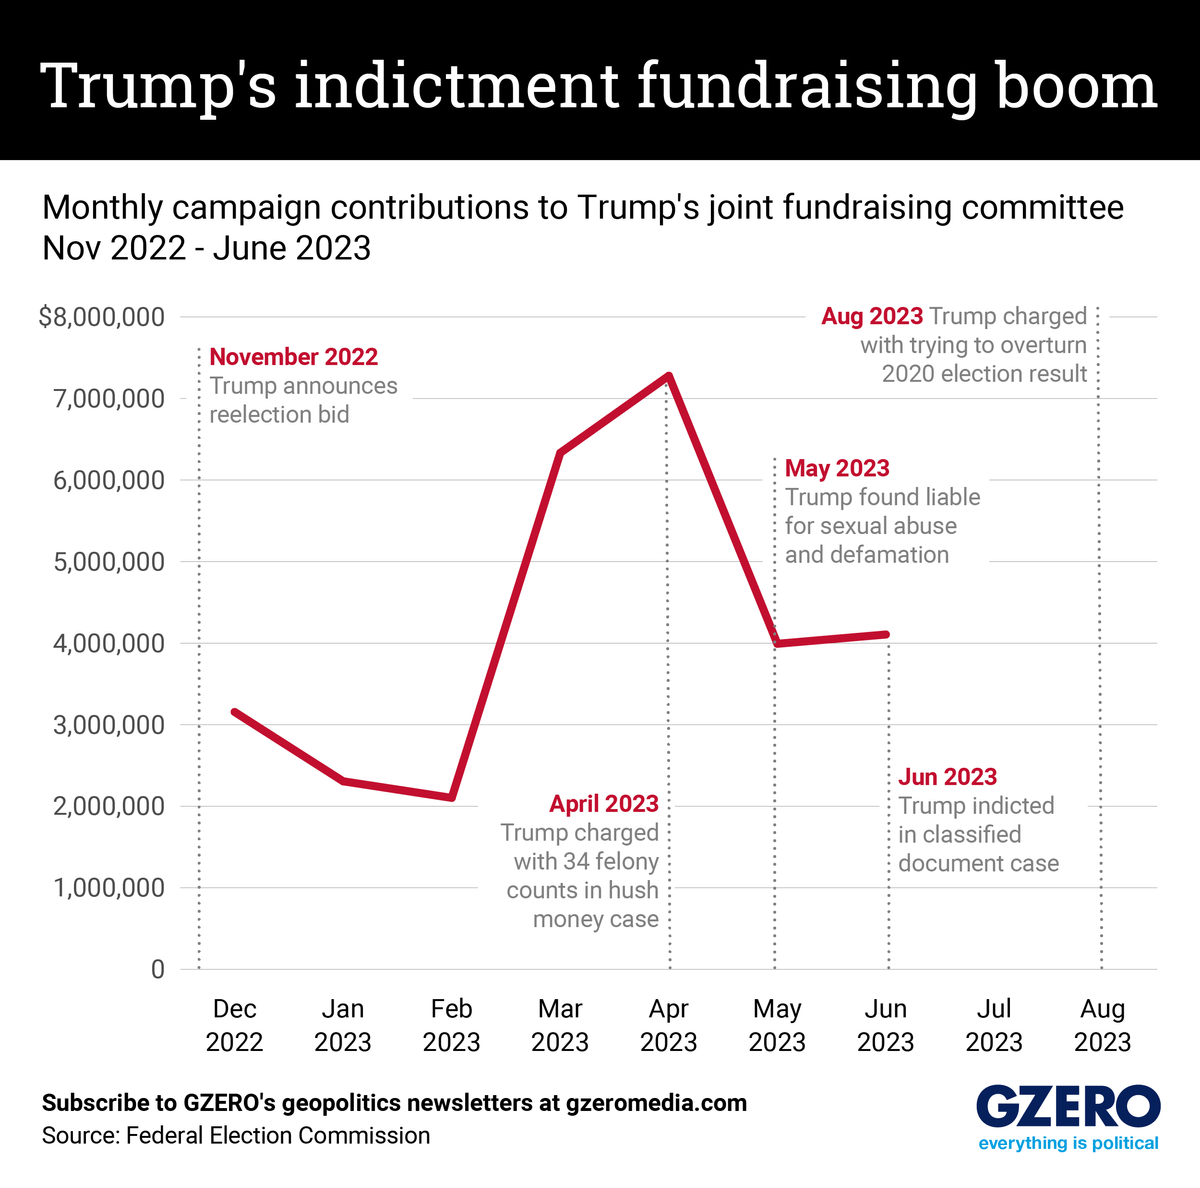 The Graphic Truth: Trump's indictment fundraising boom